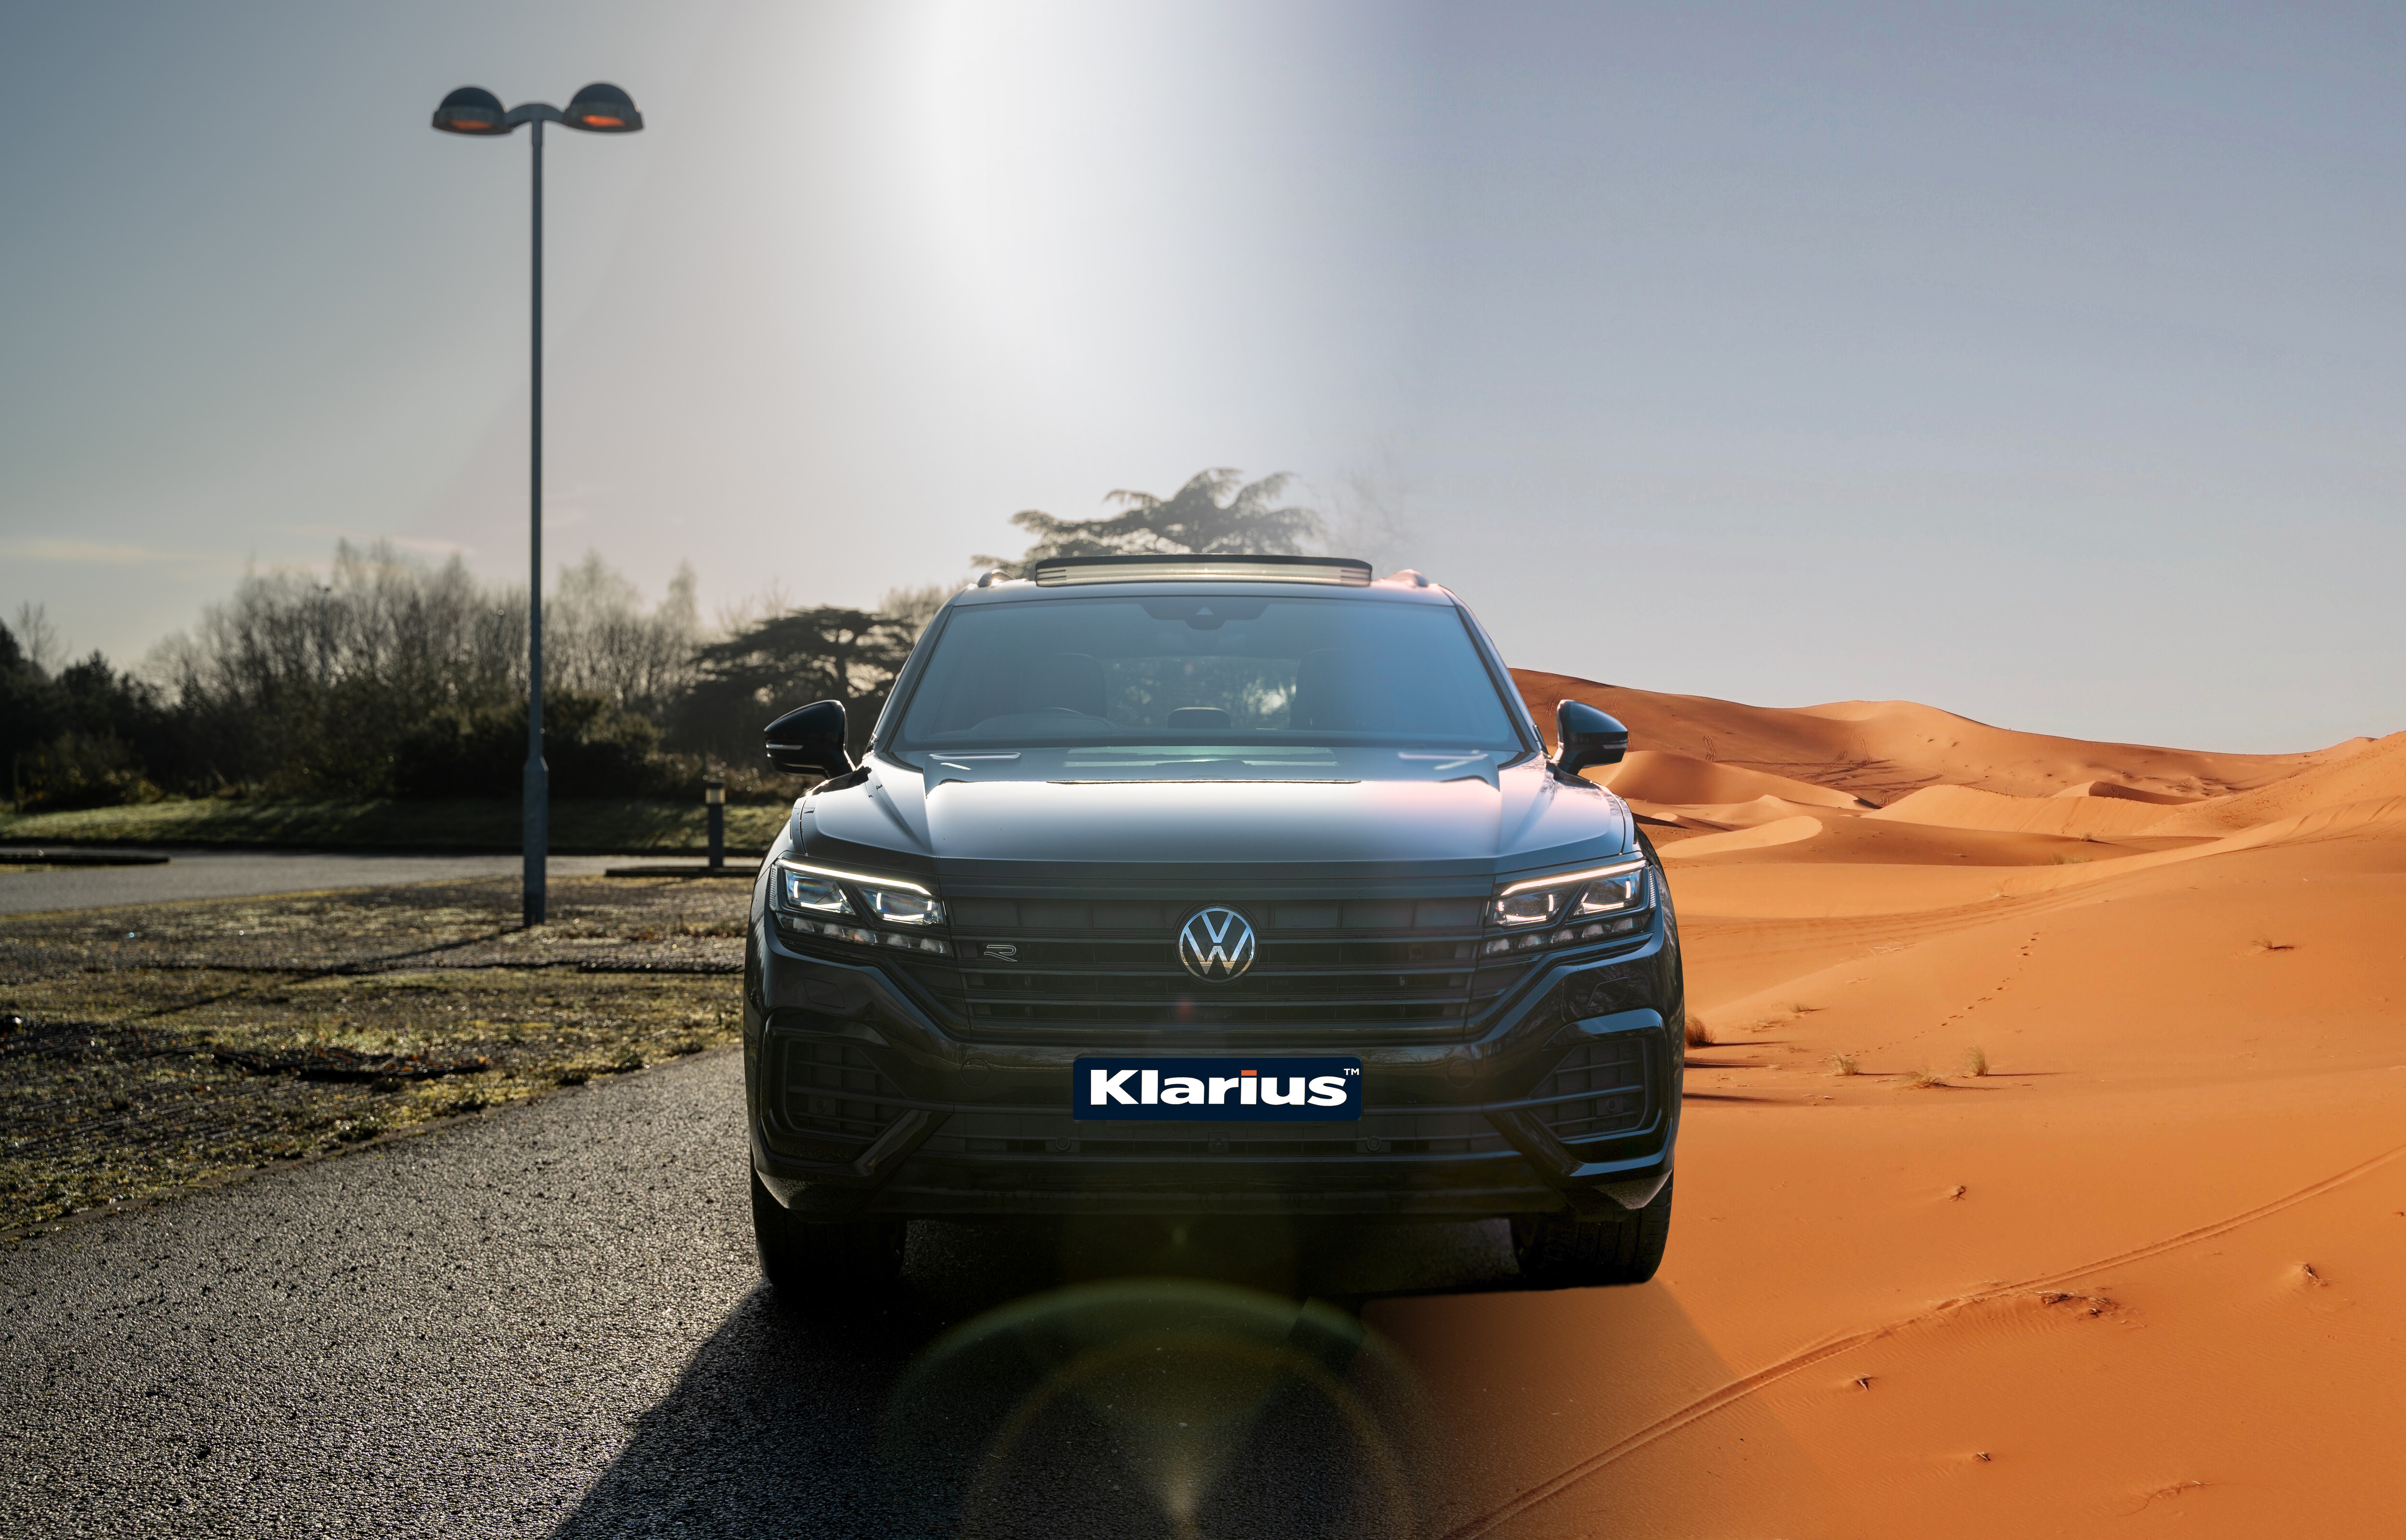 From the Sahara to the school run: The Volkswagen Touareg.